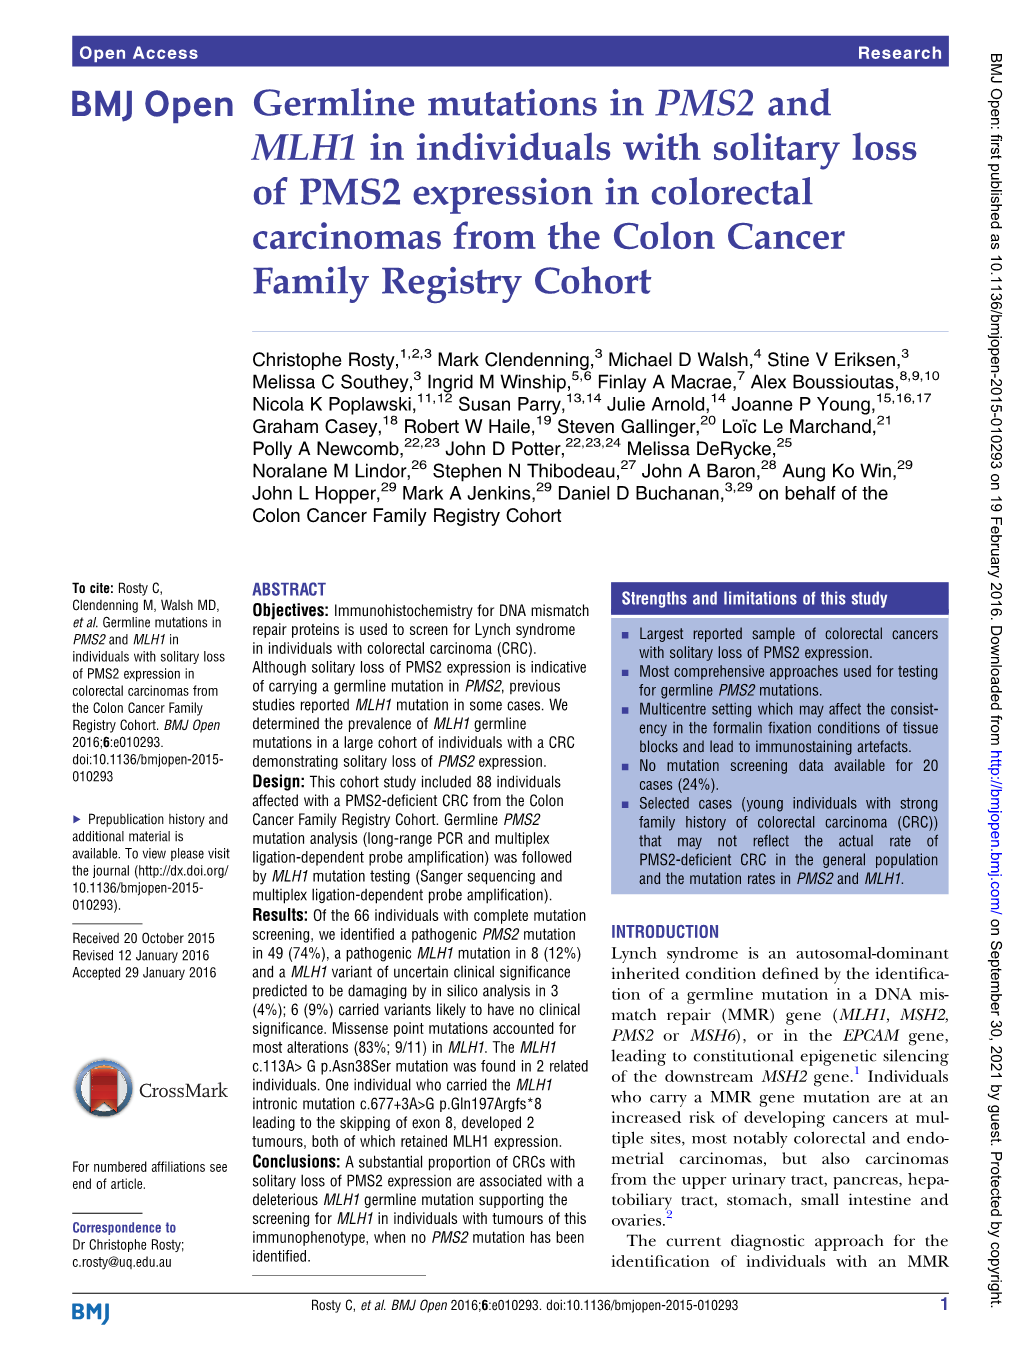 Germline Mutations in PMS2 and MLH1 in Individuals with Solitary Loss of PMS2 Expression in Colorectal Carcinomas from the Colon Cancer Family Registry Cohort